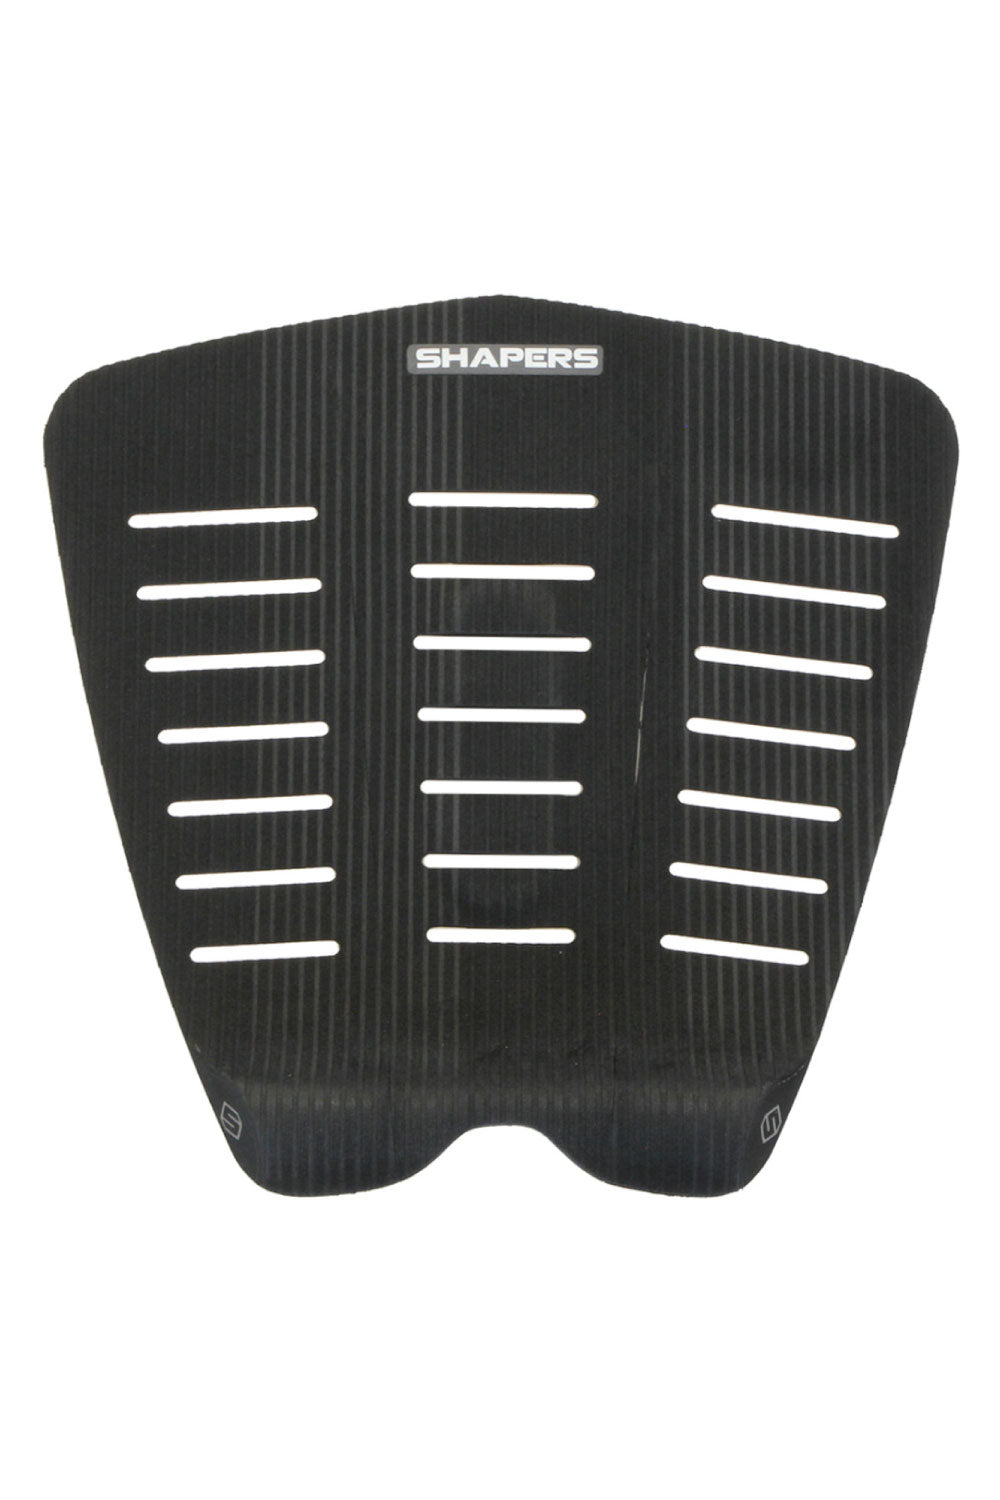 Shapers Ultra Series 3 Piece Grip Pad